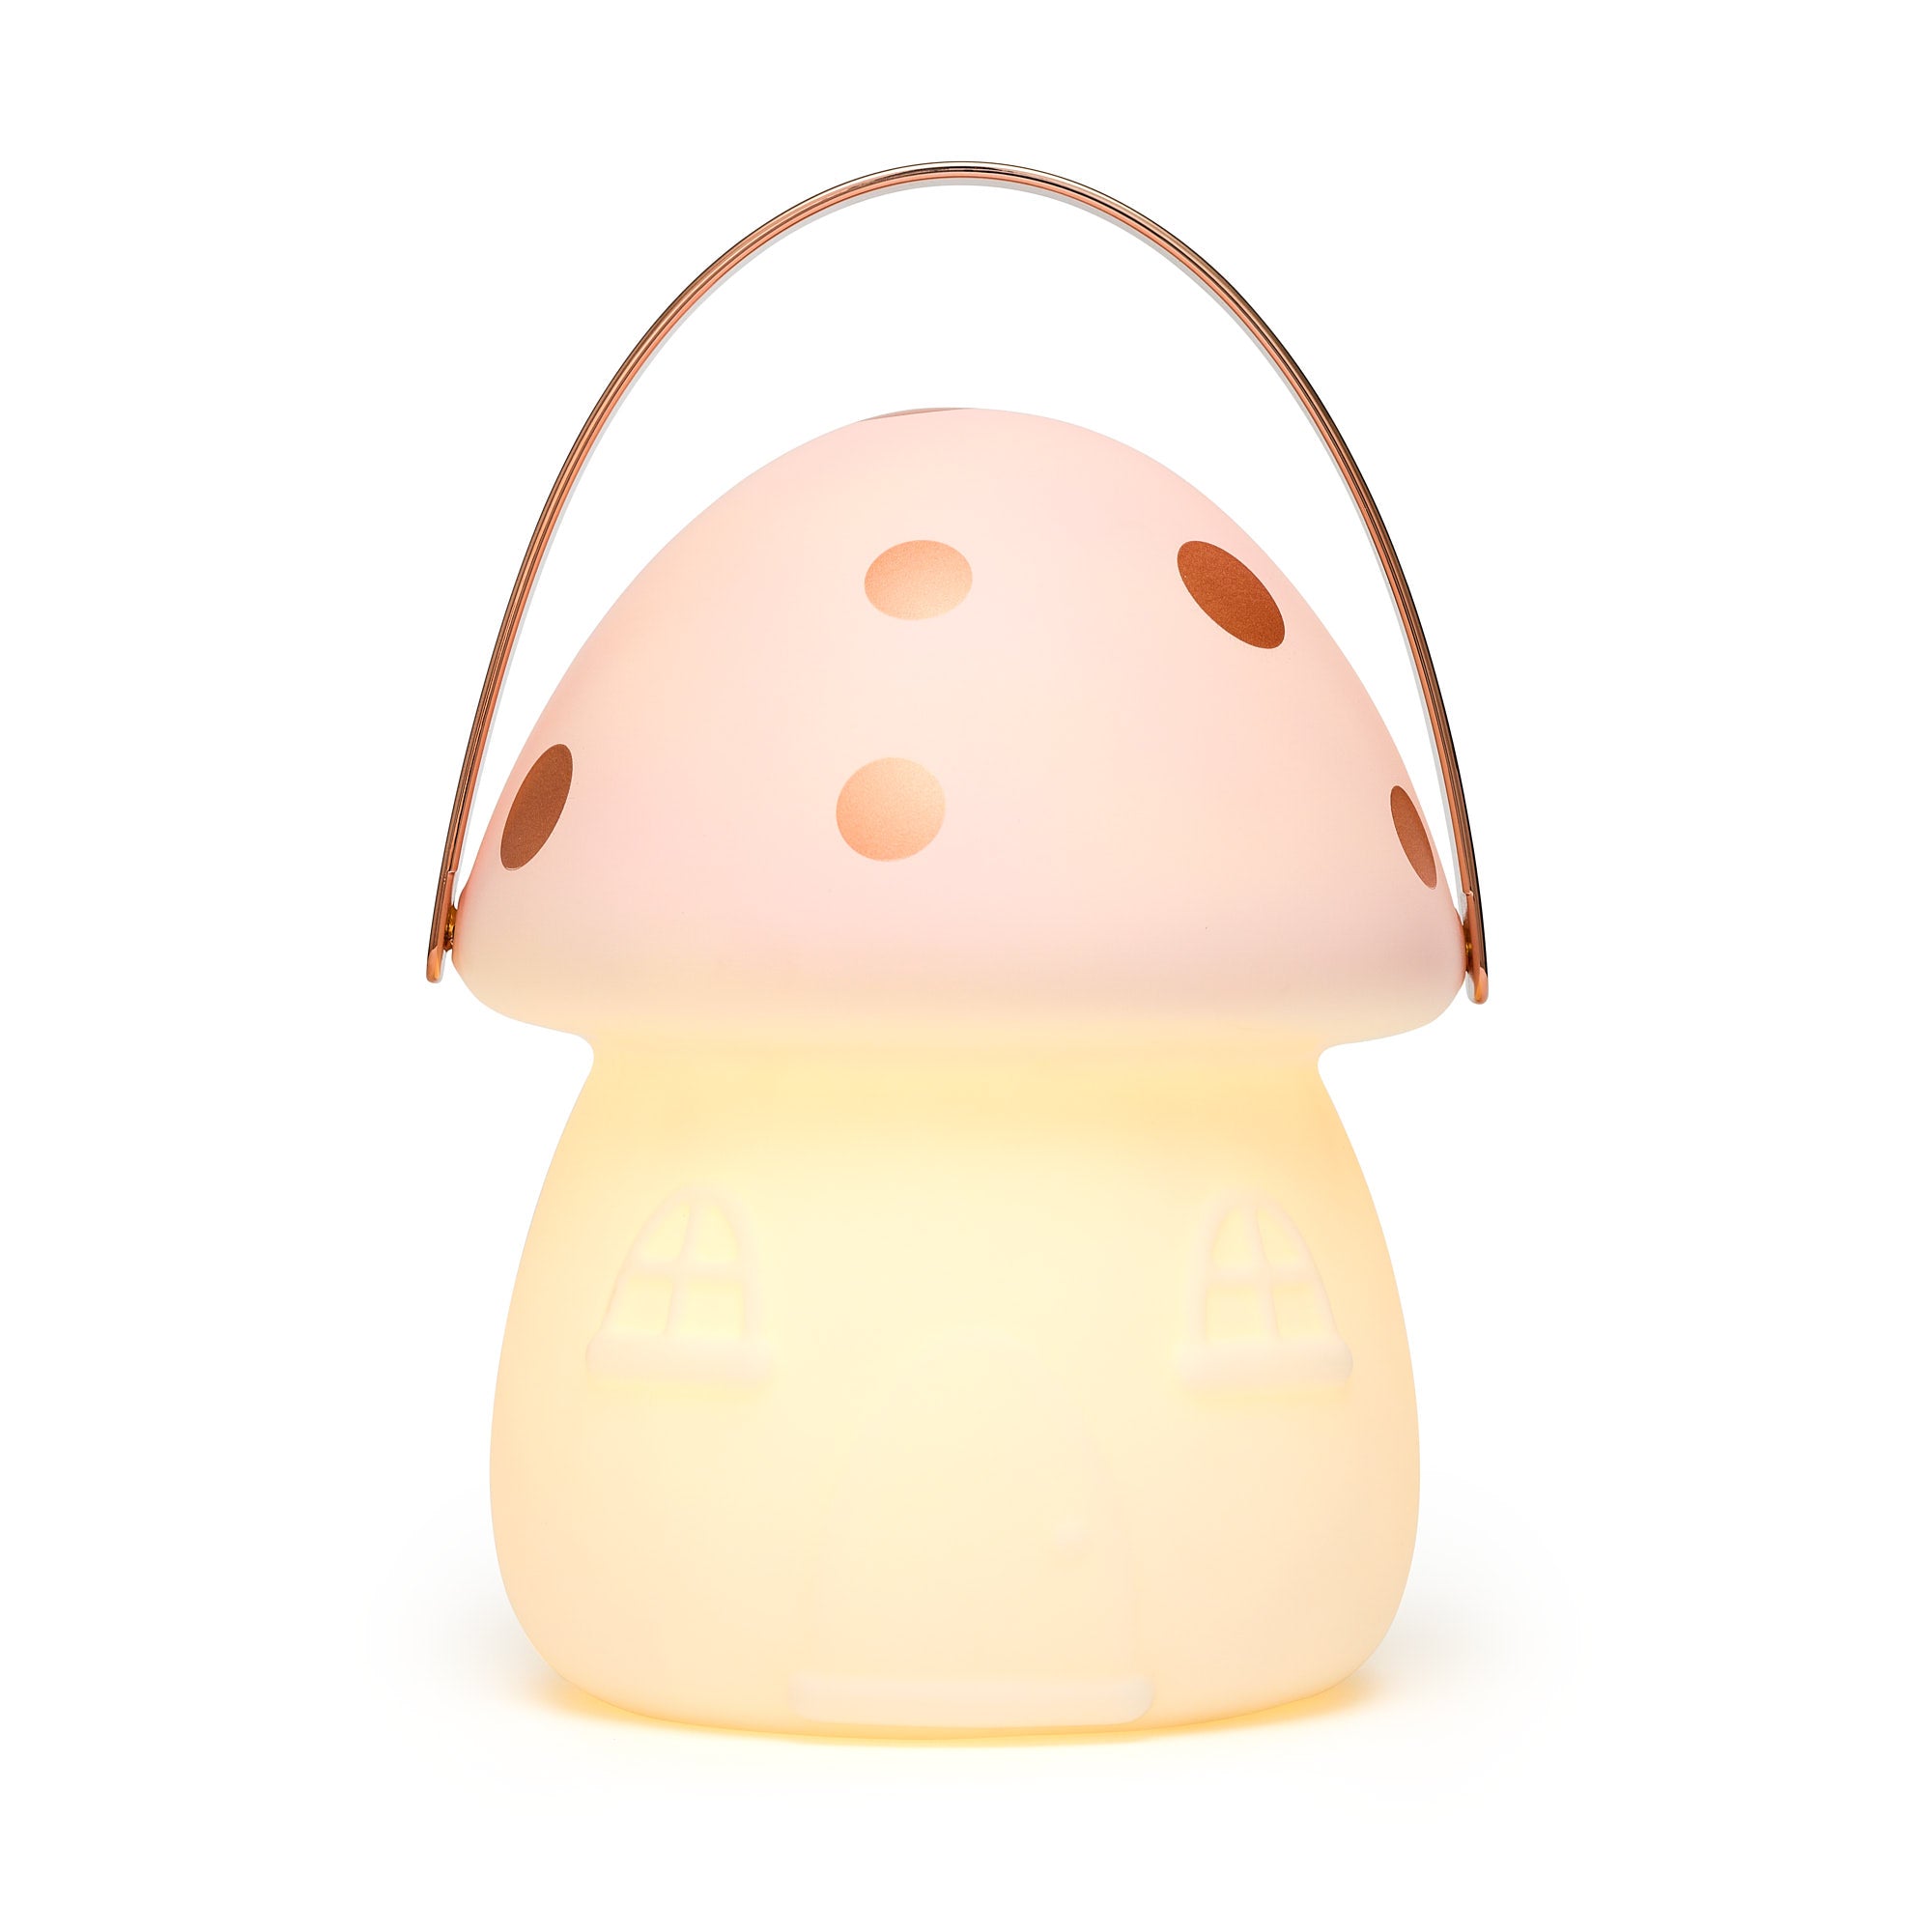 Fairy House Carry Lantern - Pink & Rose Gold PRE-ORDER NOW